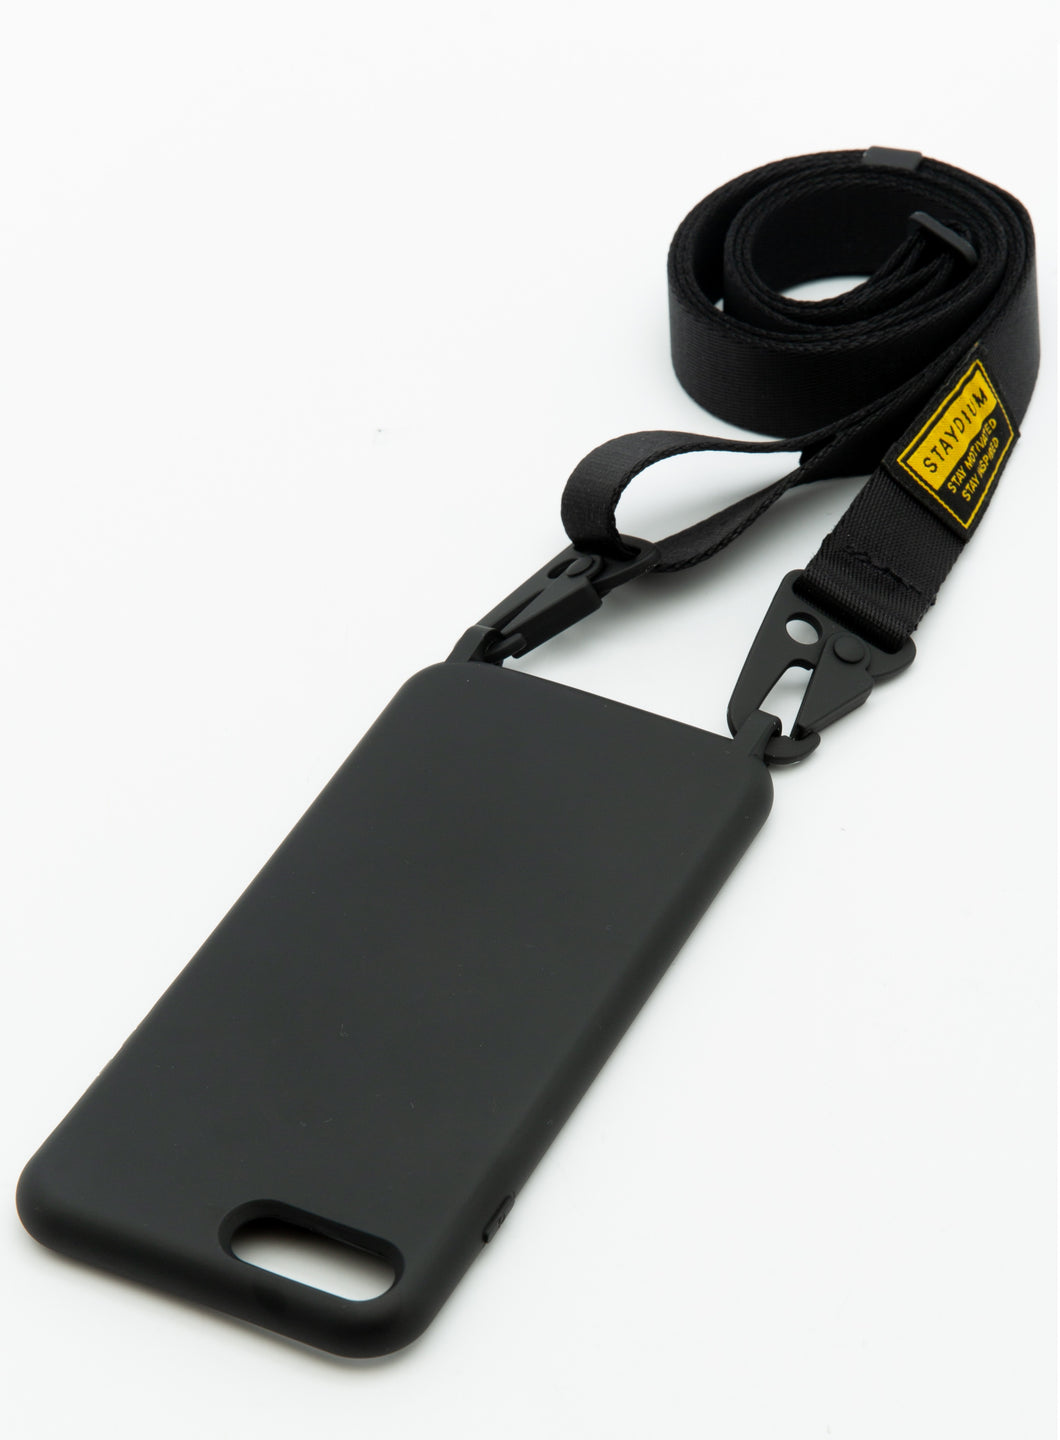 Cell Phone Case and Strap